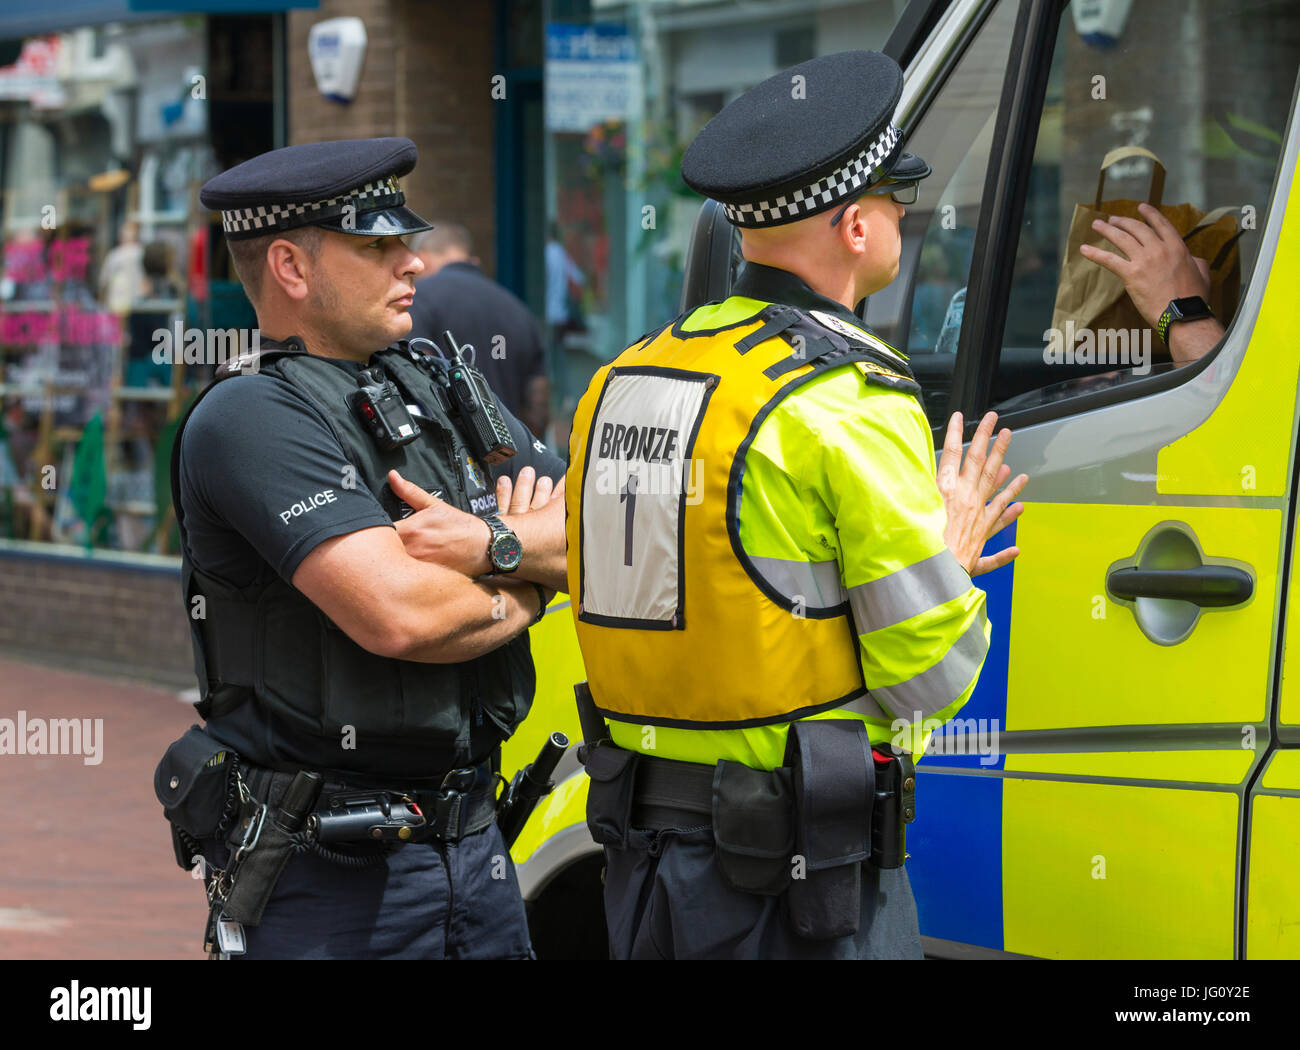 Police at a protest with the Police Bronze Commander speaking to other officers, in the south of England, UK. Stock Photo